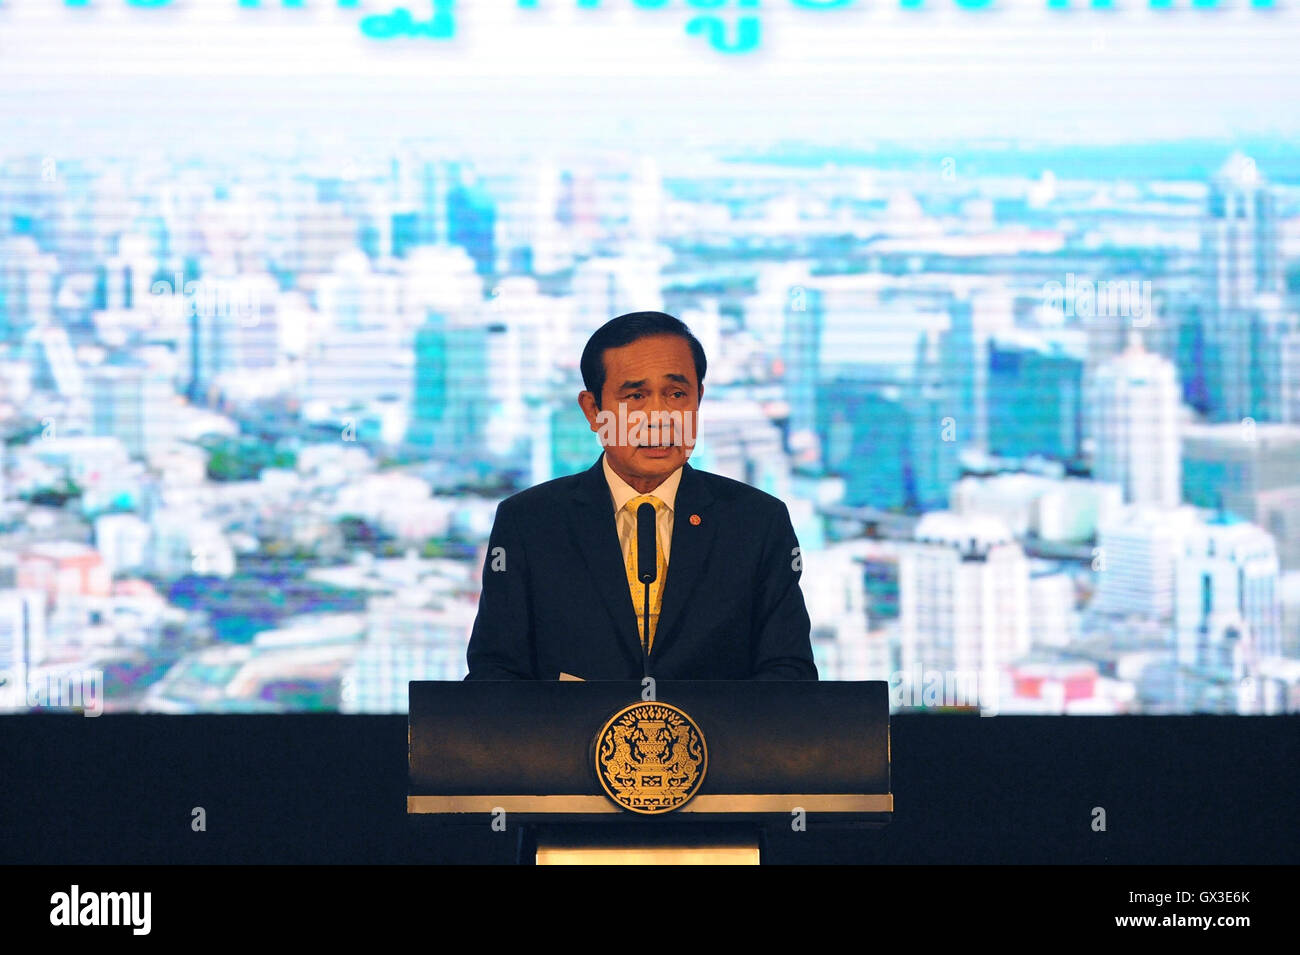 Bangkok, Thailand. 15th Sep, 2016. Thai Prime Minister Prayut Chan-o-cha speaks during a press conference on the performances of the government during the last two years, at the Thai Government House in Bangkok, capital of Thailand, on Sept. 15, 2016. Thailand could potentially upgrade itself from the long-standing status of a Third World developing country to a 'First World' developed country, Thai Prime Minister Prayut Chan-o-cha said on Thursday. © Rachen Sageamsak/Xinhua/Alamy Live News Stock Photo